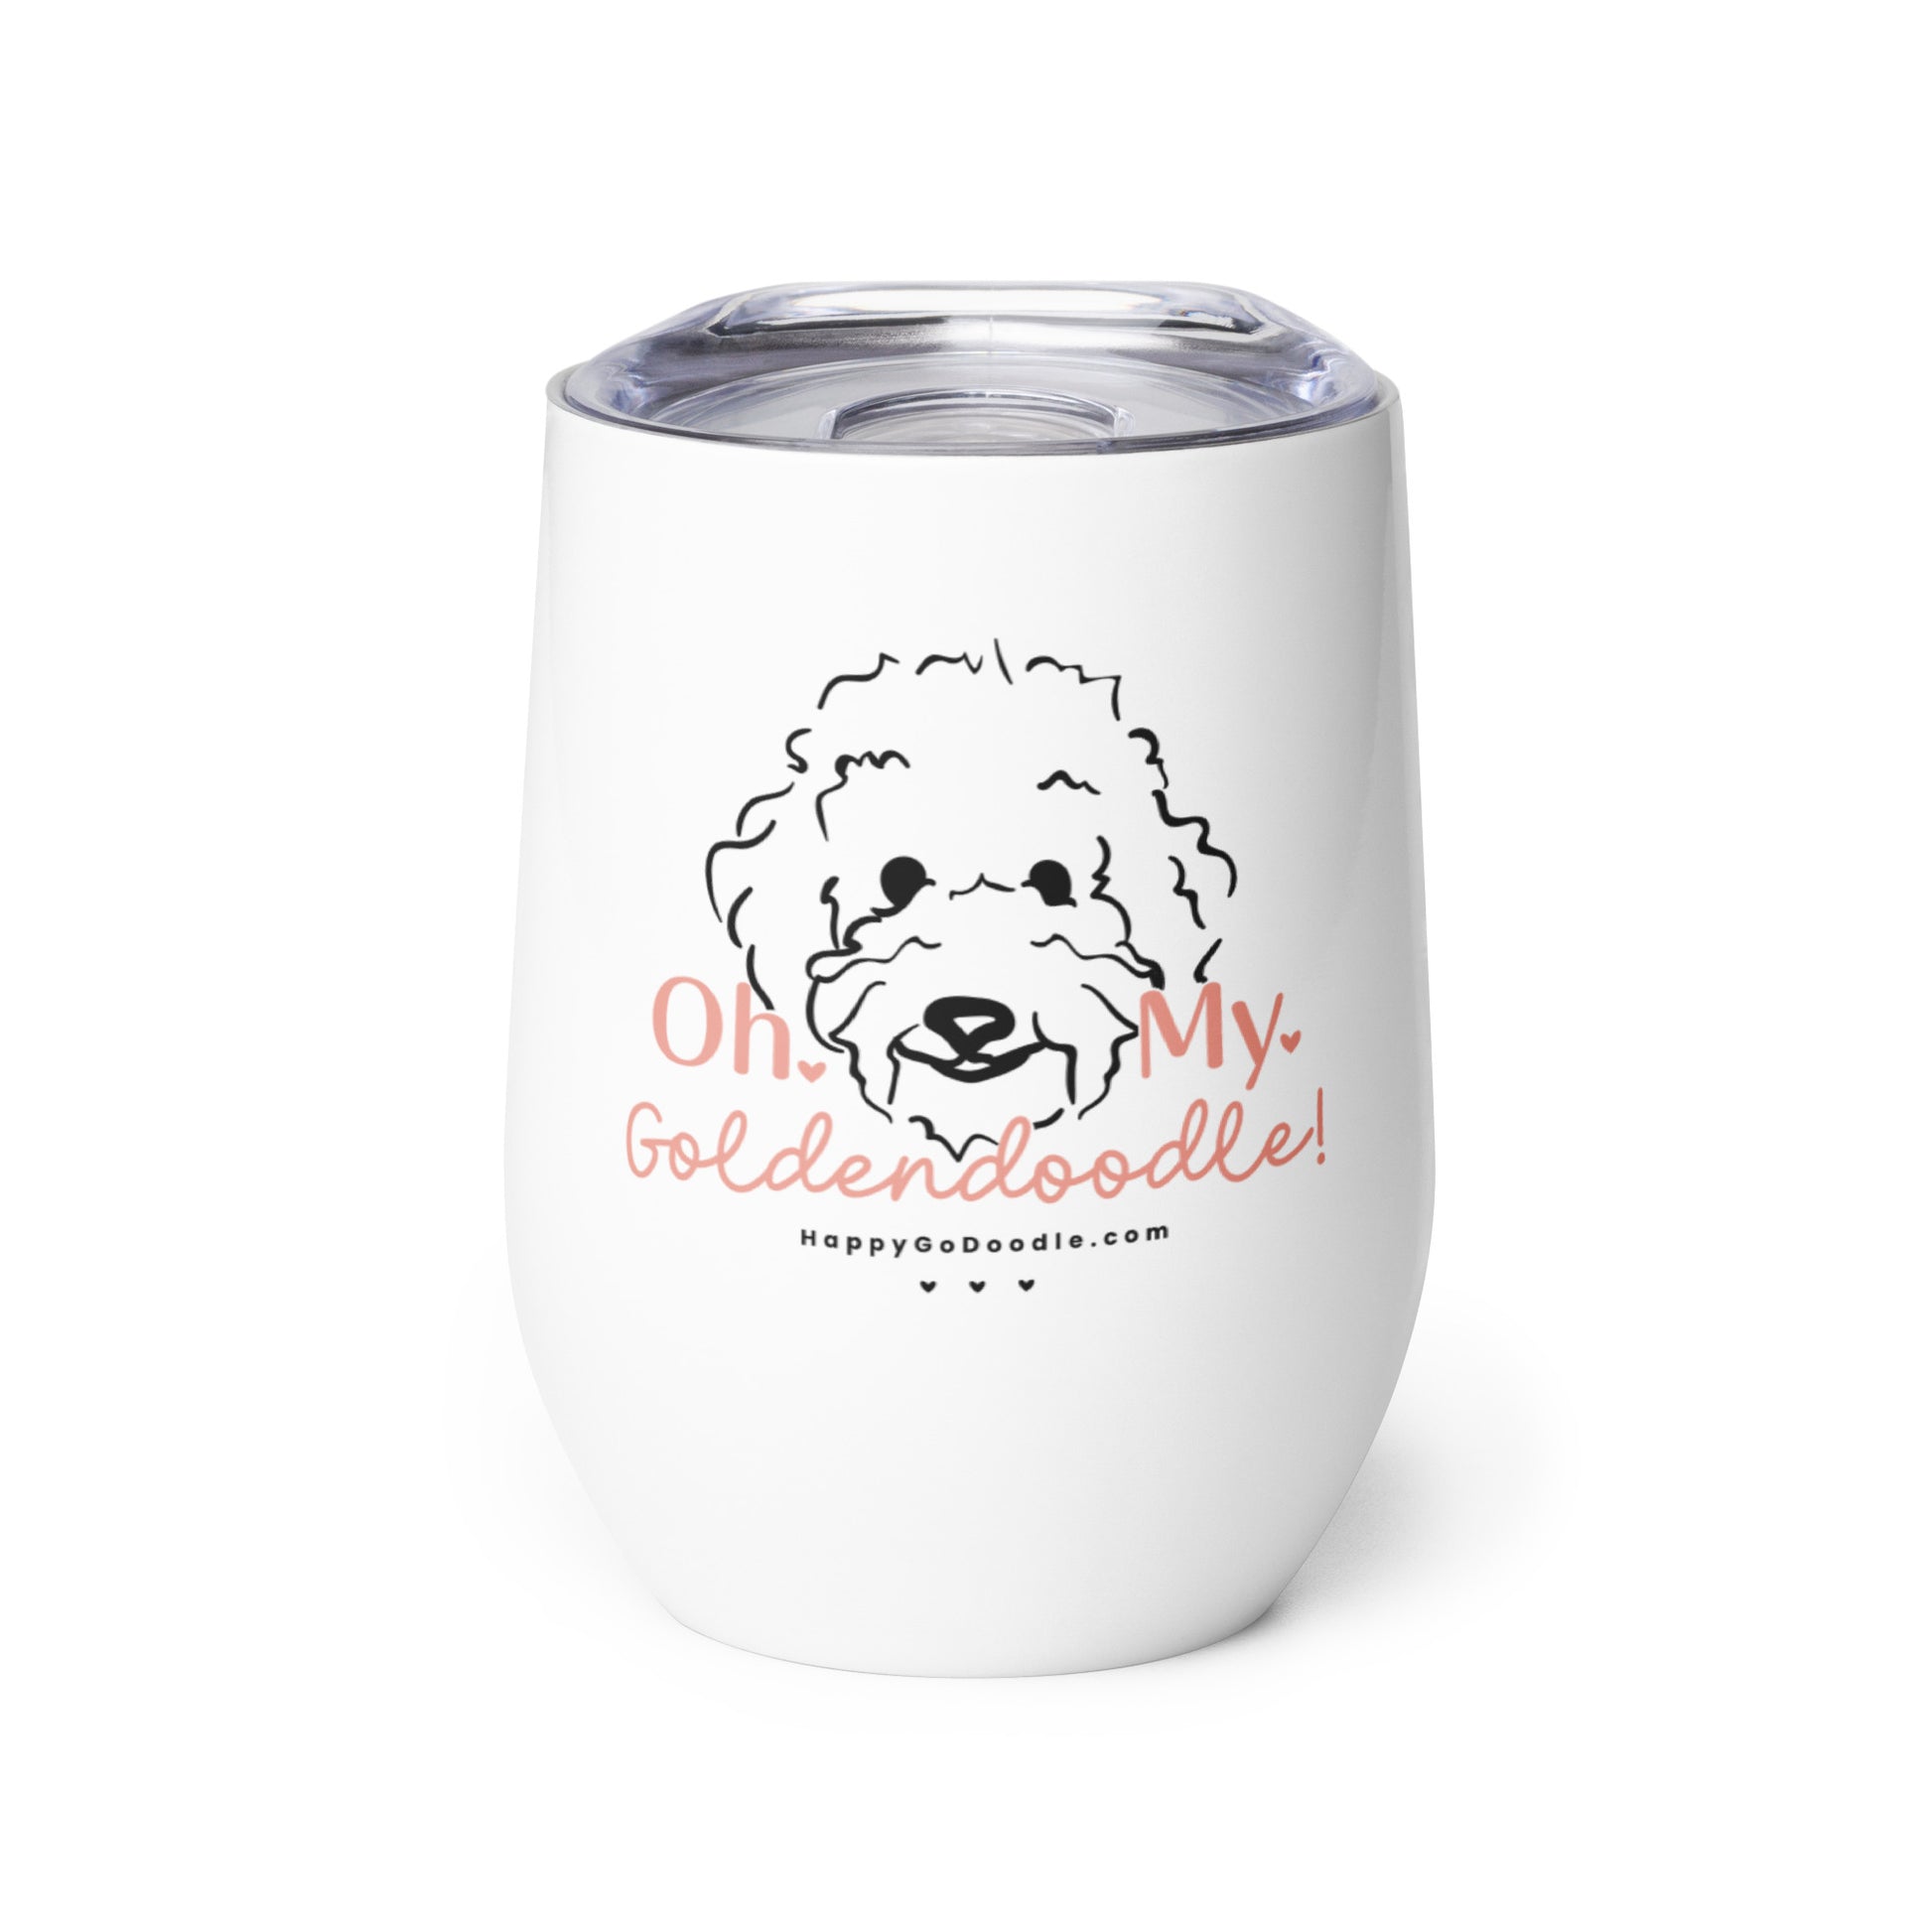 11 oz white wine tumbler with lid and dogs cute face and words Oh My Goldendoodle